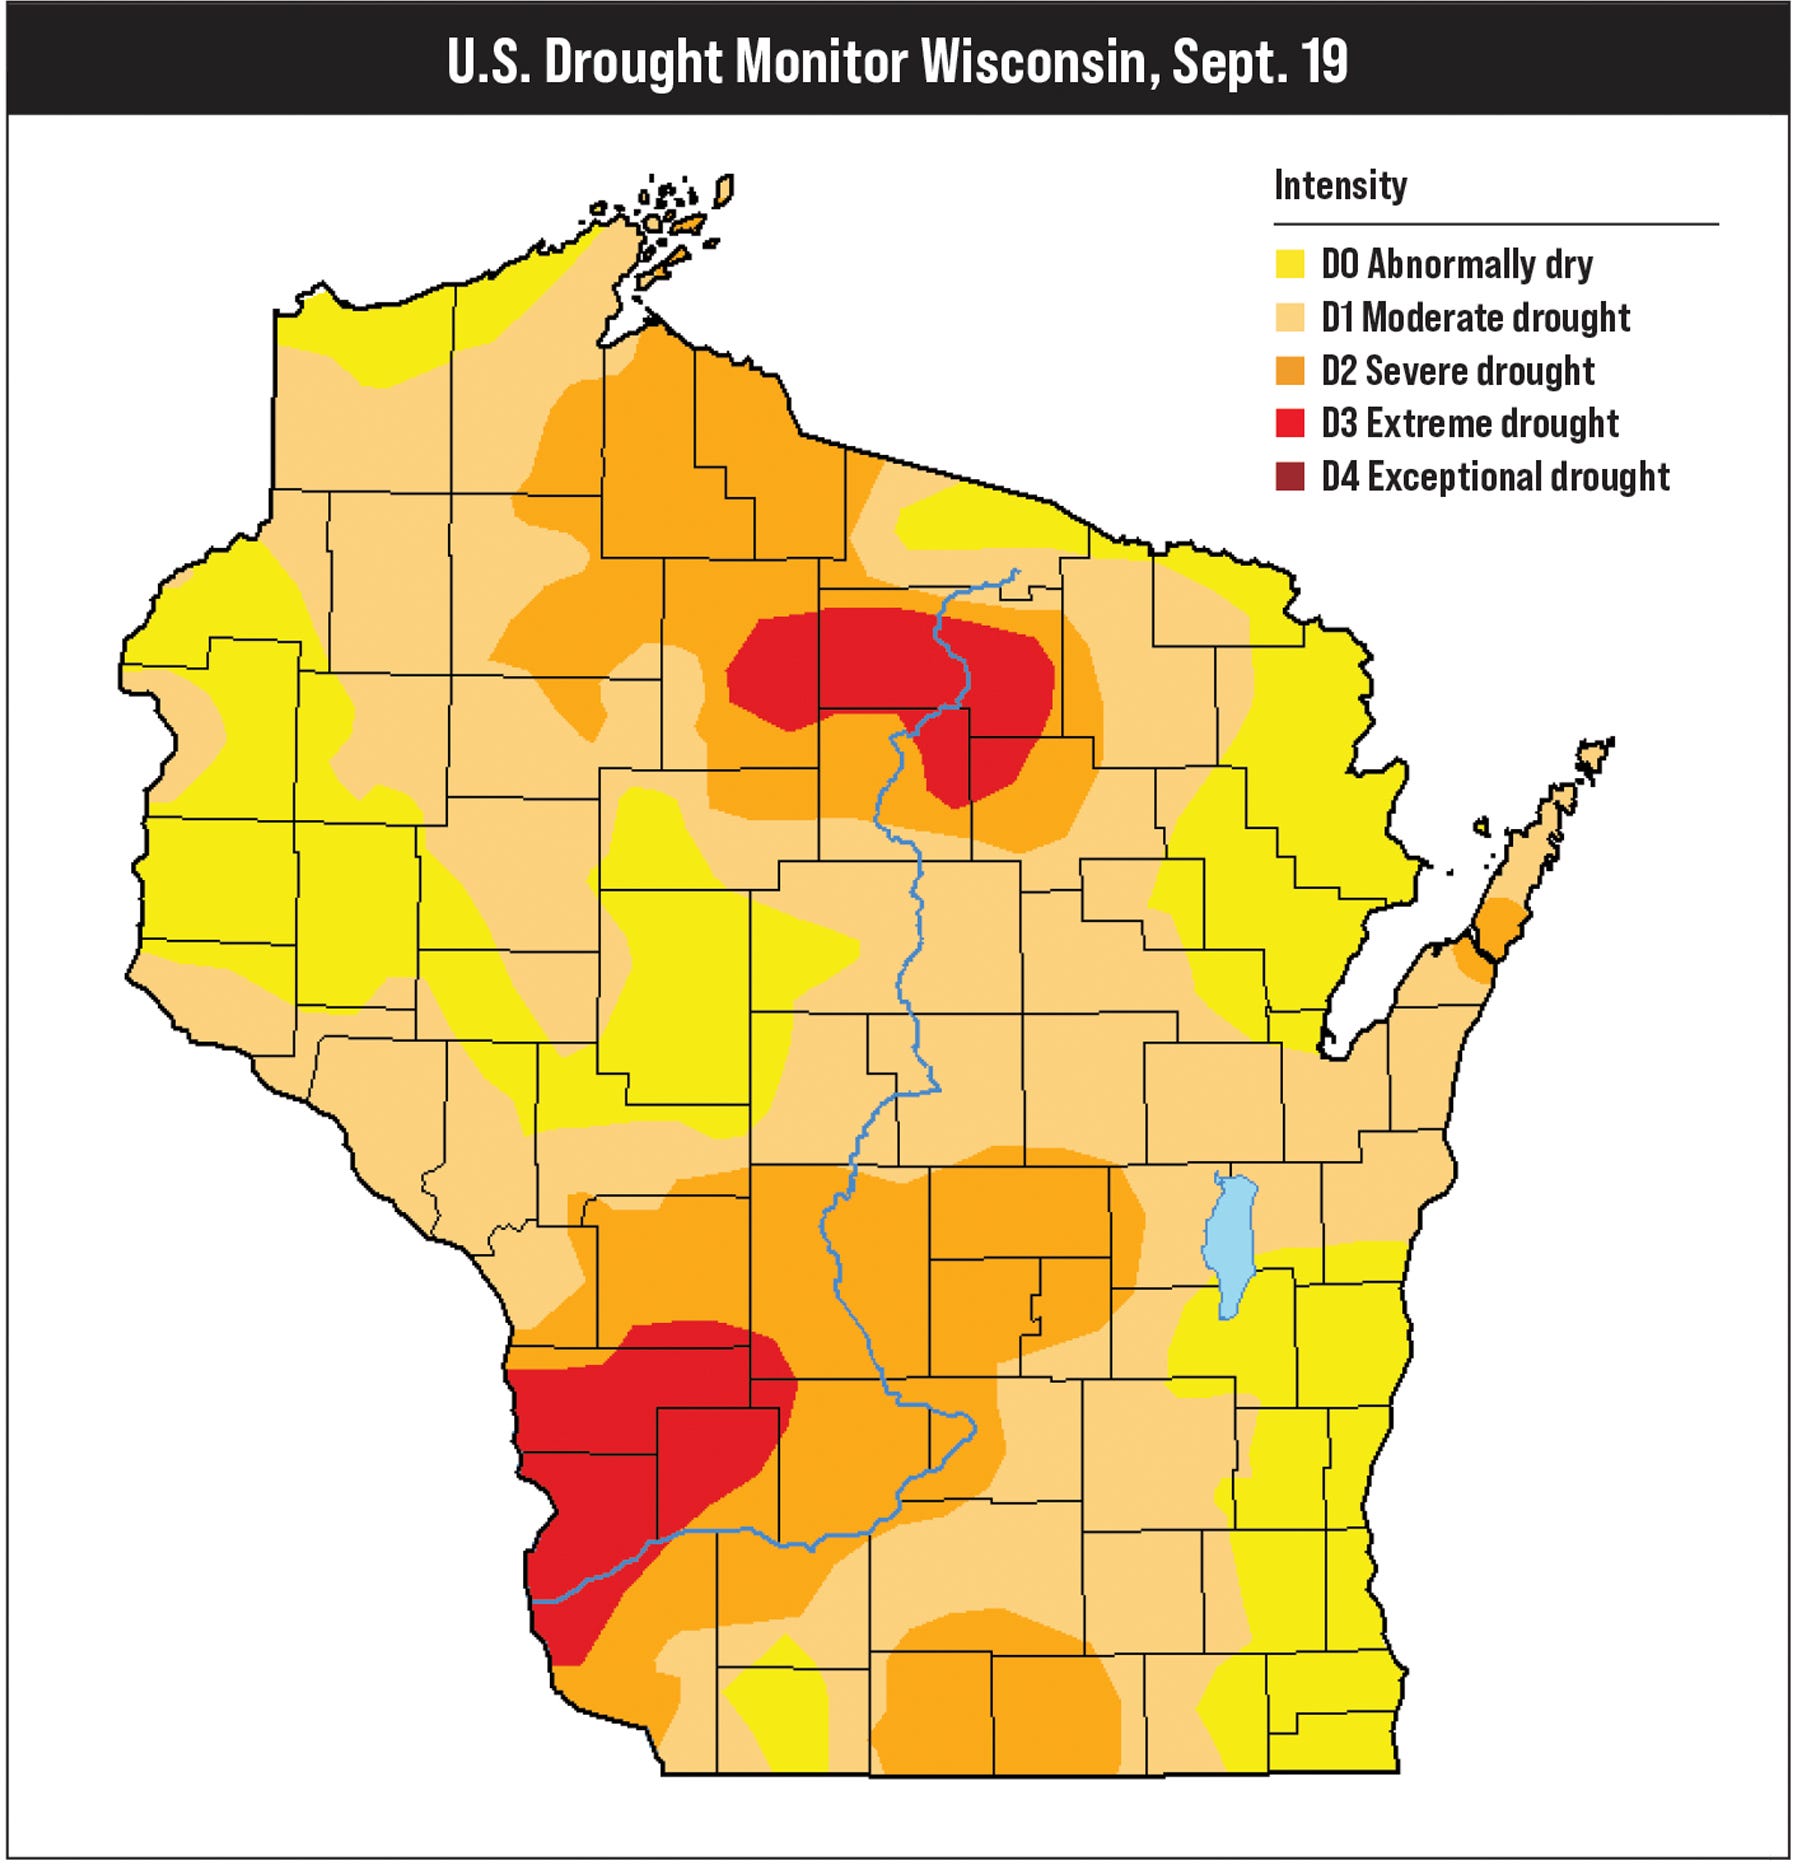 U.S. Drought Monitor map for Wisconsin, Sept. 19